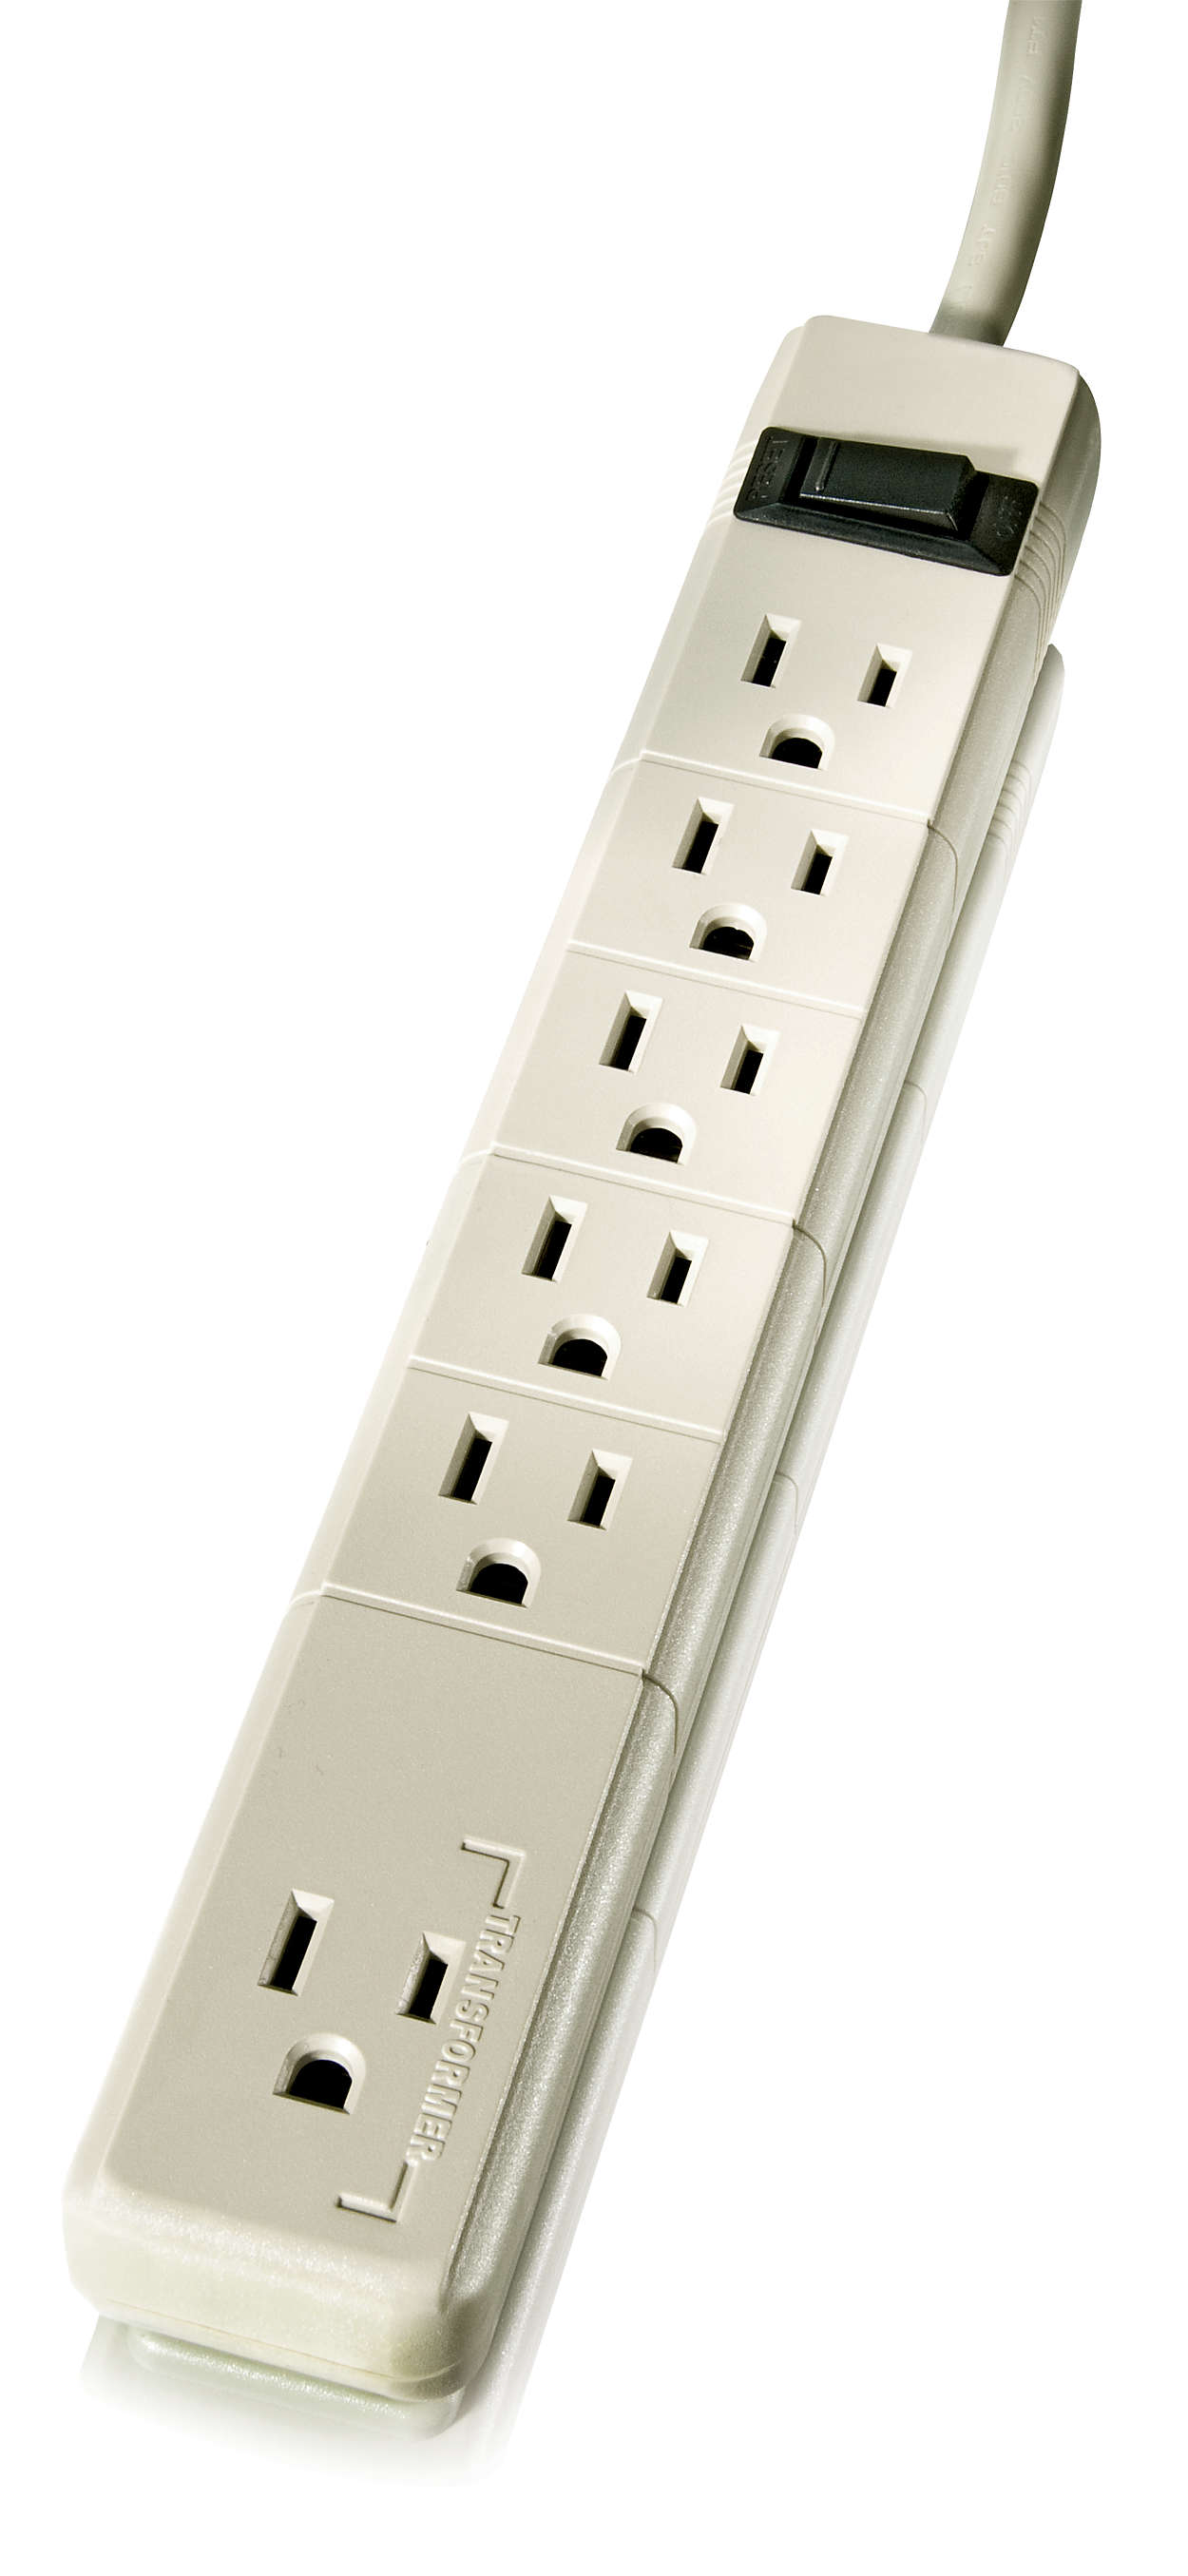 Multiple outlet